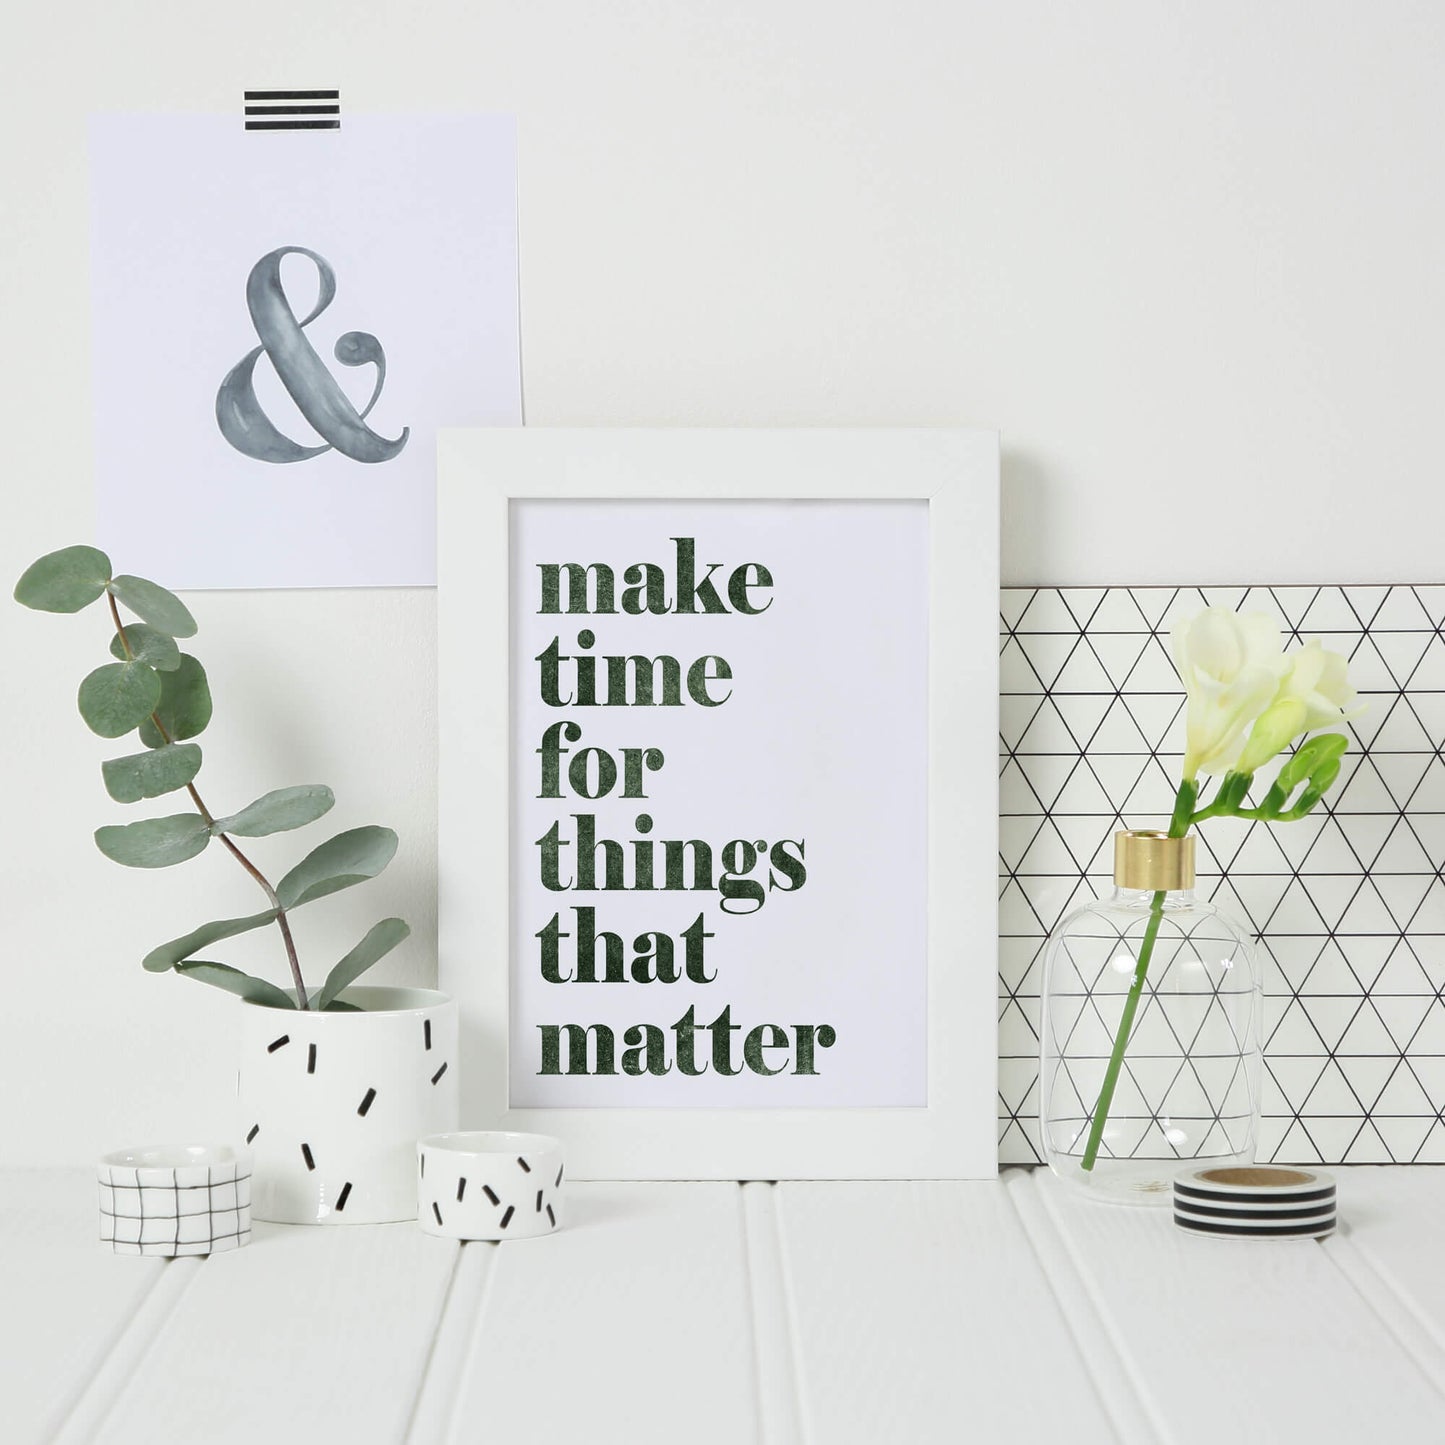 Make Time For Things That Matter Print by SixElevenCreations. Product Code SEP0703